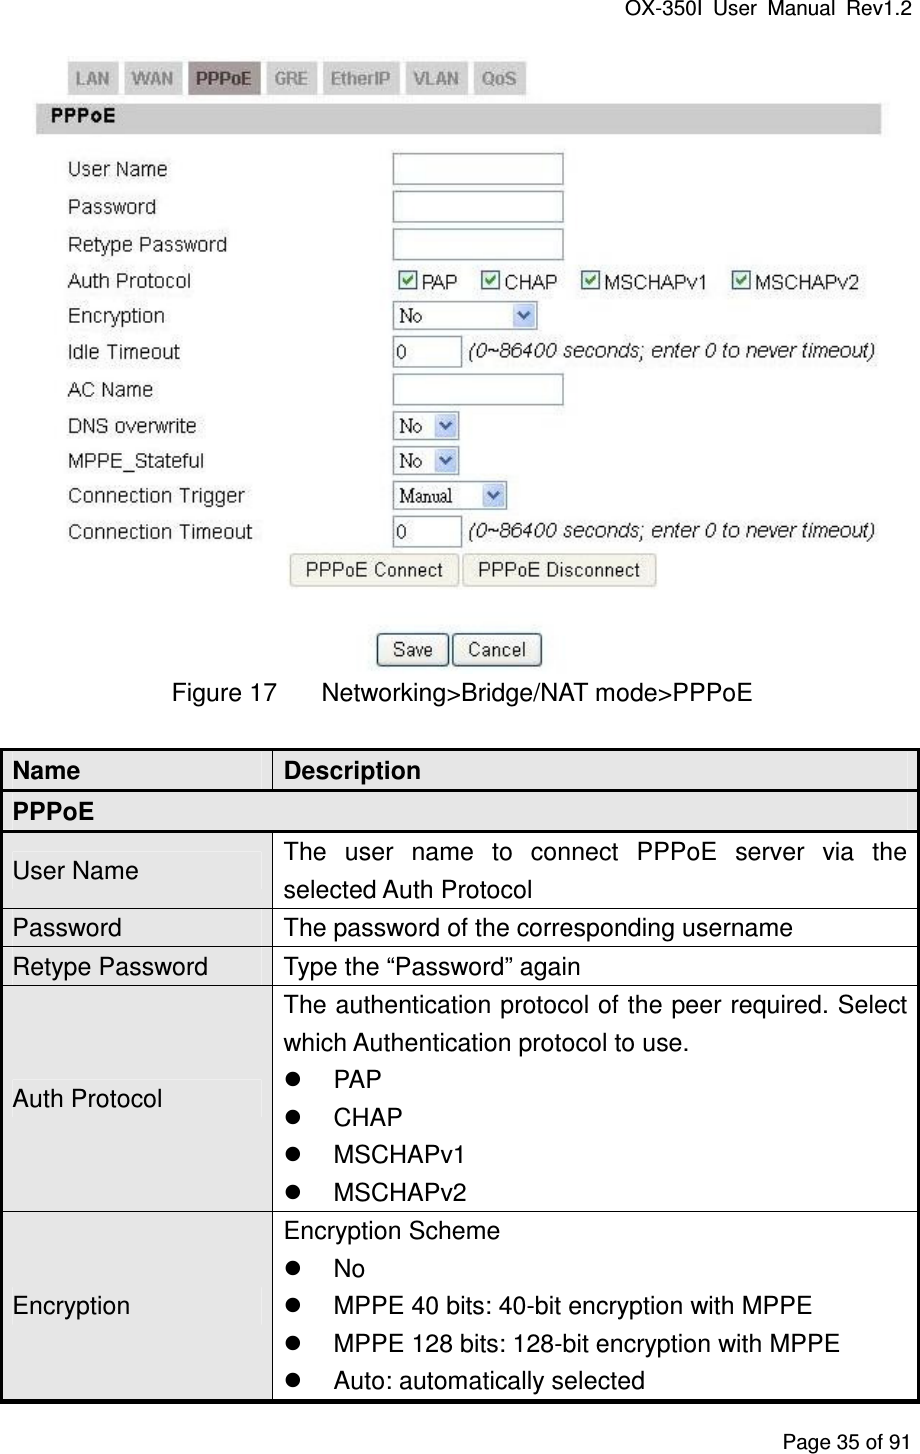 OX-350I  User  Manual  Rev1.2 Page 35 of 91  Figure 17  Networking&gt;Bridge/NAT mode&gt;PPPoE Name  Description PPPoE User Name  The  user  name  to  connect  PPPoE  server  via  the selected Auth Protocol Password  The password of the corresponding username Retype Password  Type the “Password” again Auth Protocol The authentication protocol of the peer required. Select which Authentication protocol to use.   PAP   CHAP   MSCHAPv1   MSCHAPv2 Encryption Encryption Scheme   No   MPPE 40 bits: 40-bit encryption with MPPE   MPPE 128 bits: 128-bit encryption with MPPE   Auto: automatically selected 